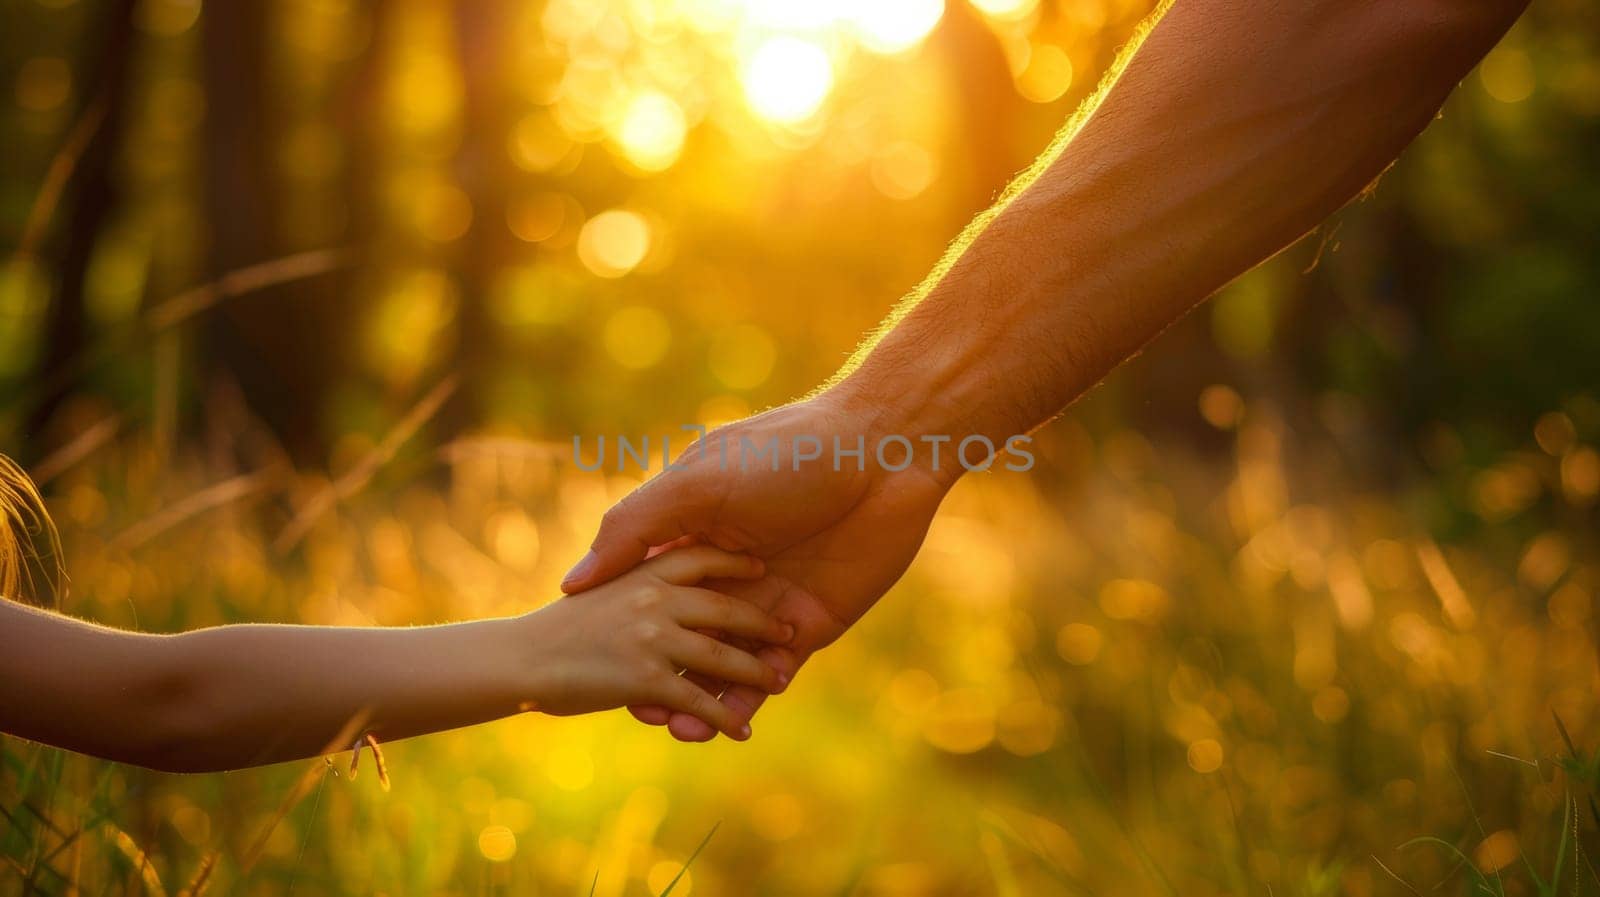 A man and a child holding hands in the grass, AI by starush